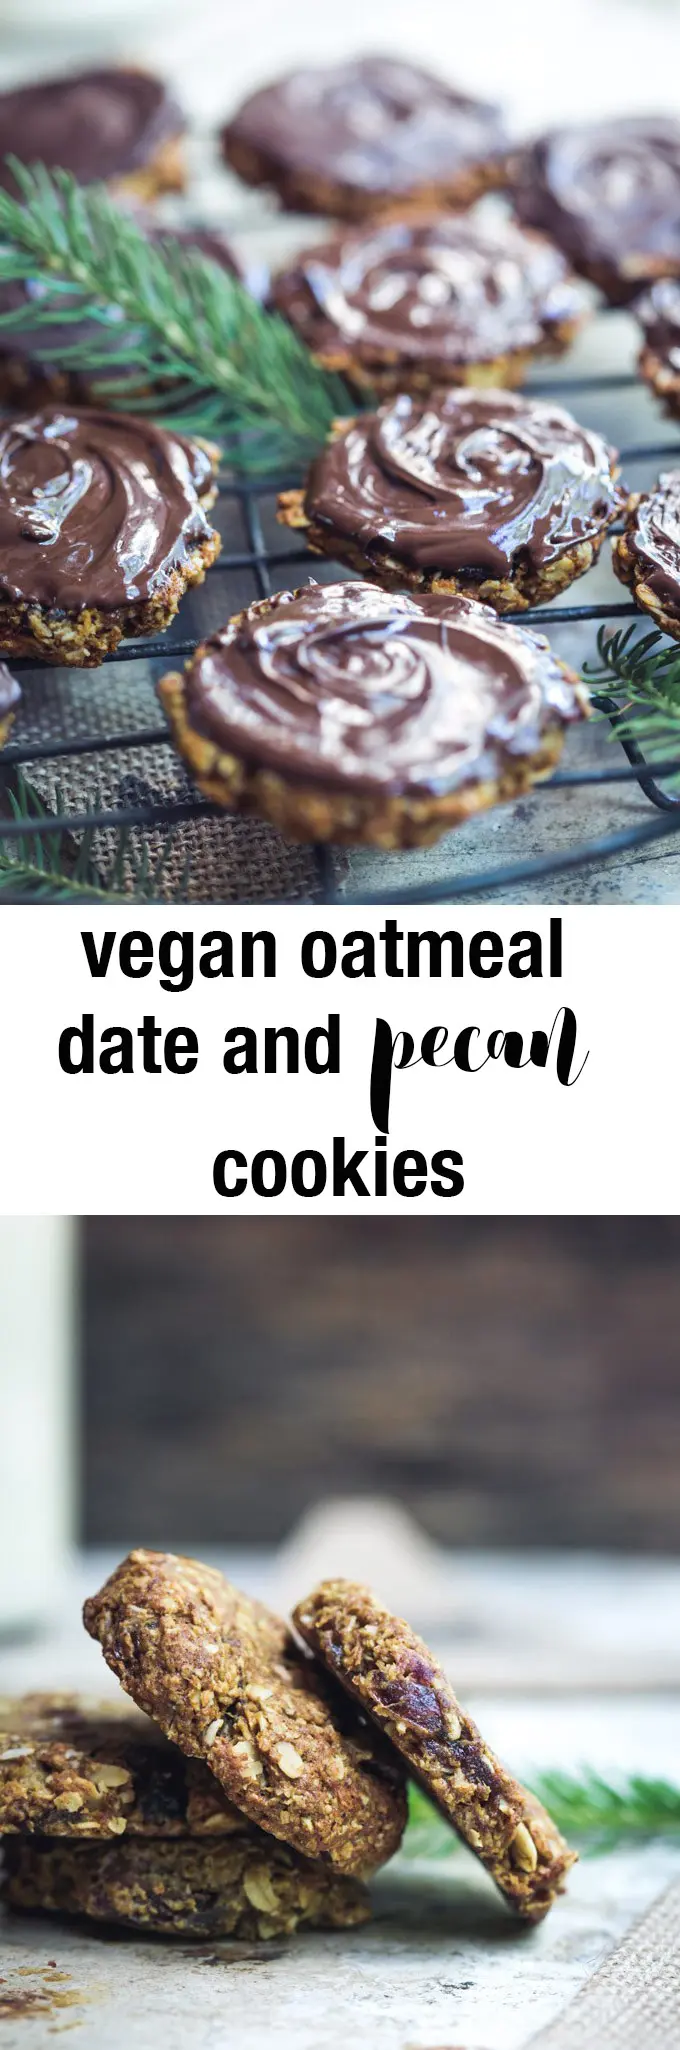 oatmeal-date-and-pecan-cookies-pin